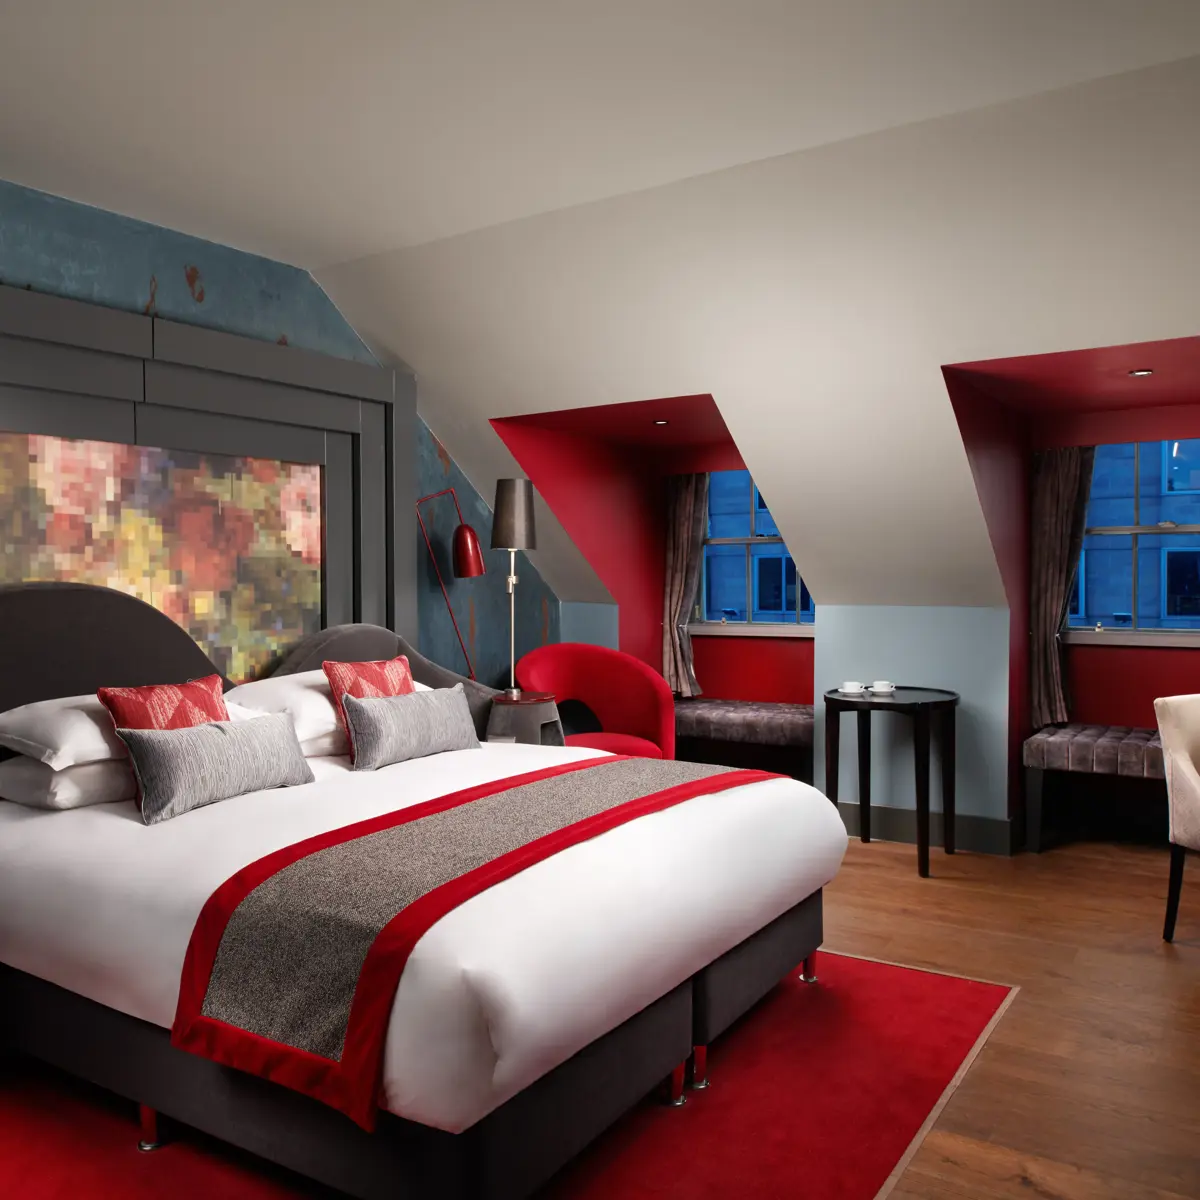 Spacious bedroom featuring a king-sized bed with vibrant red accents.